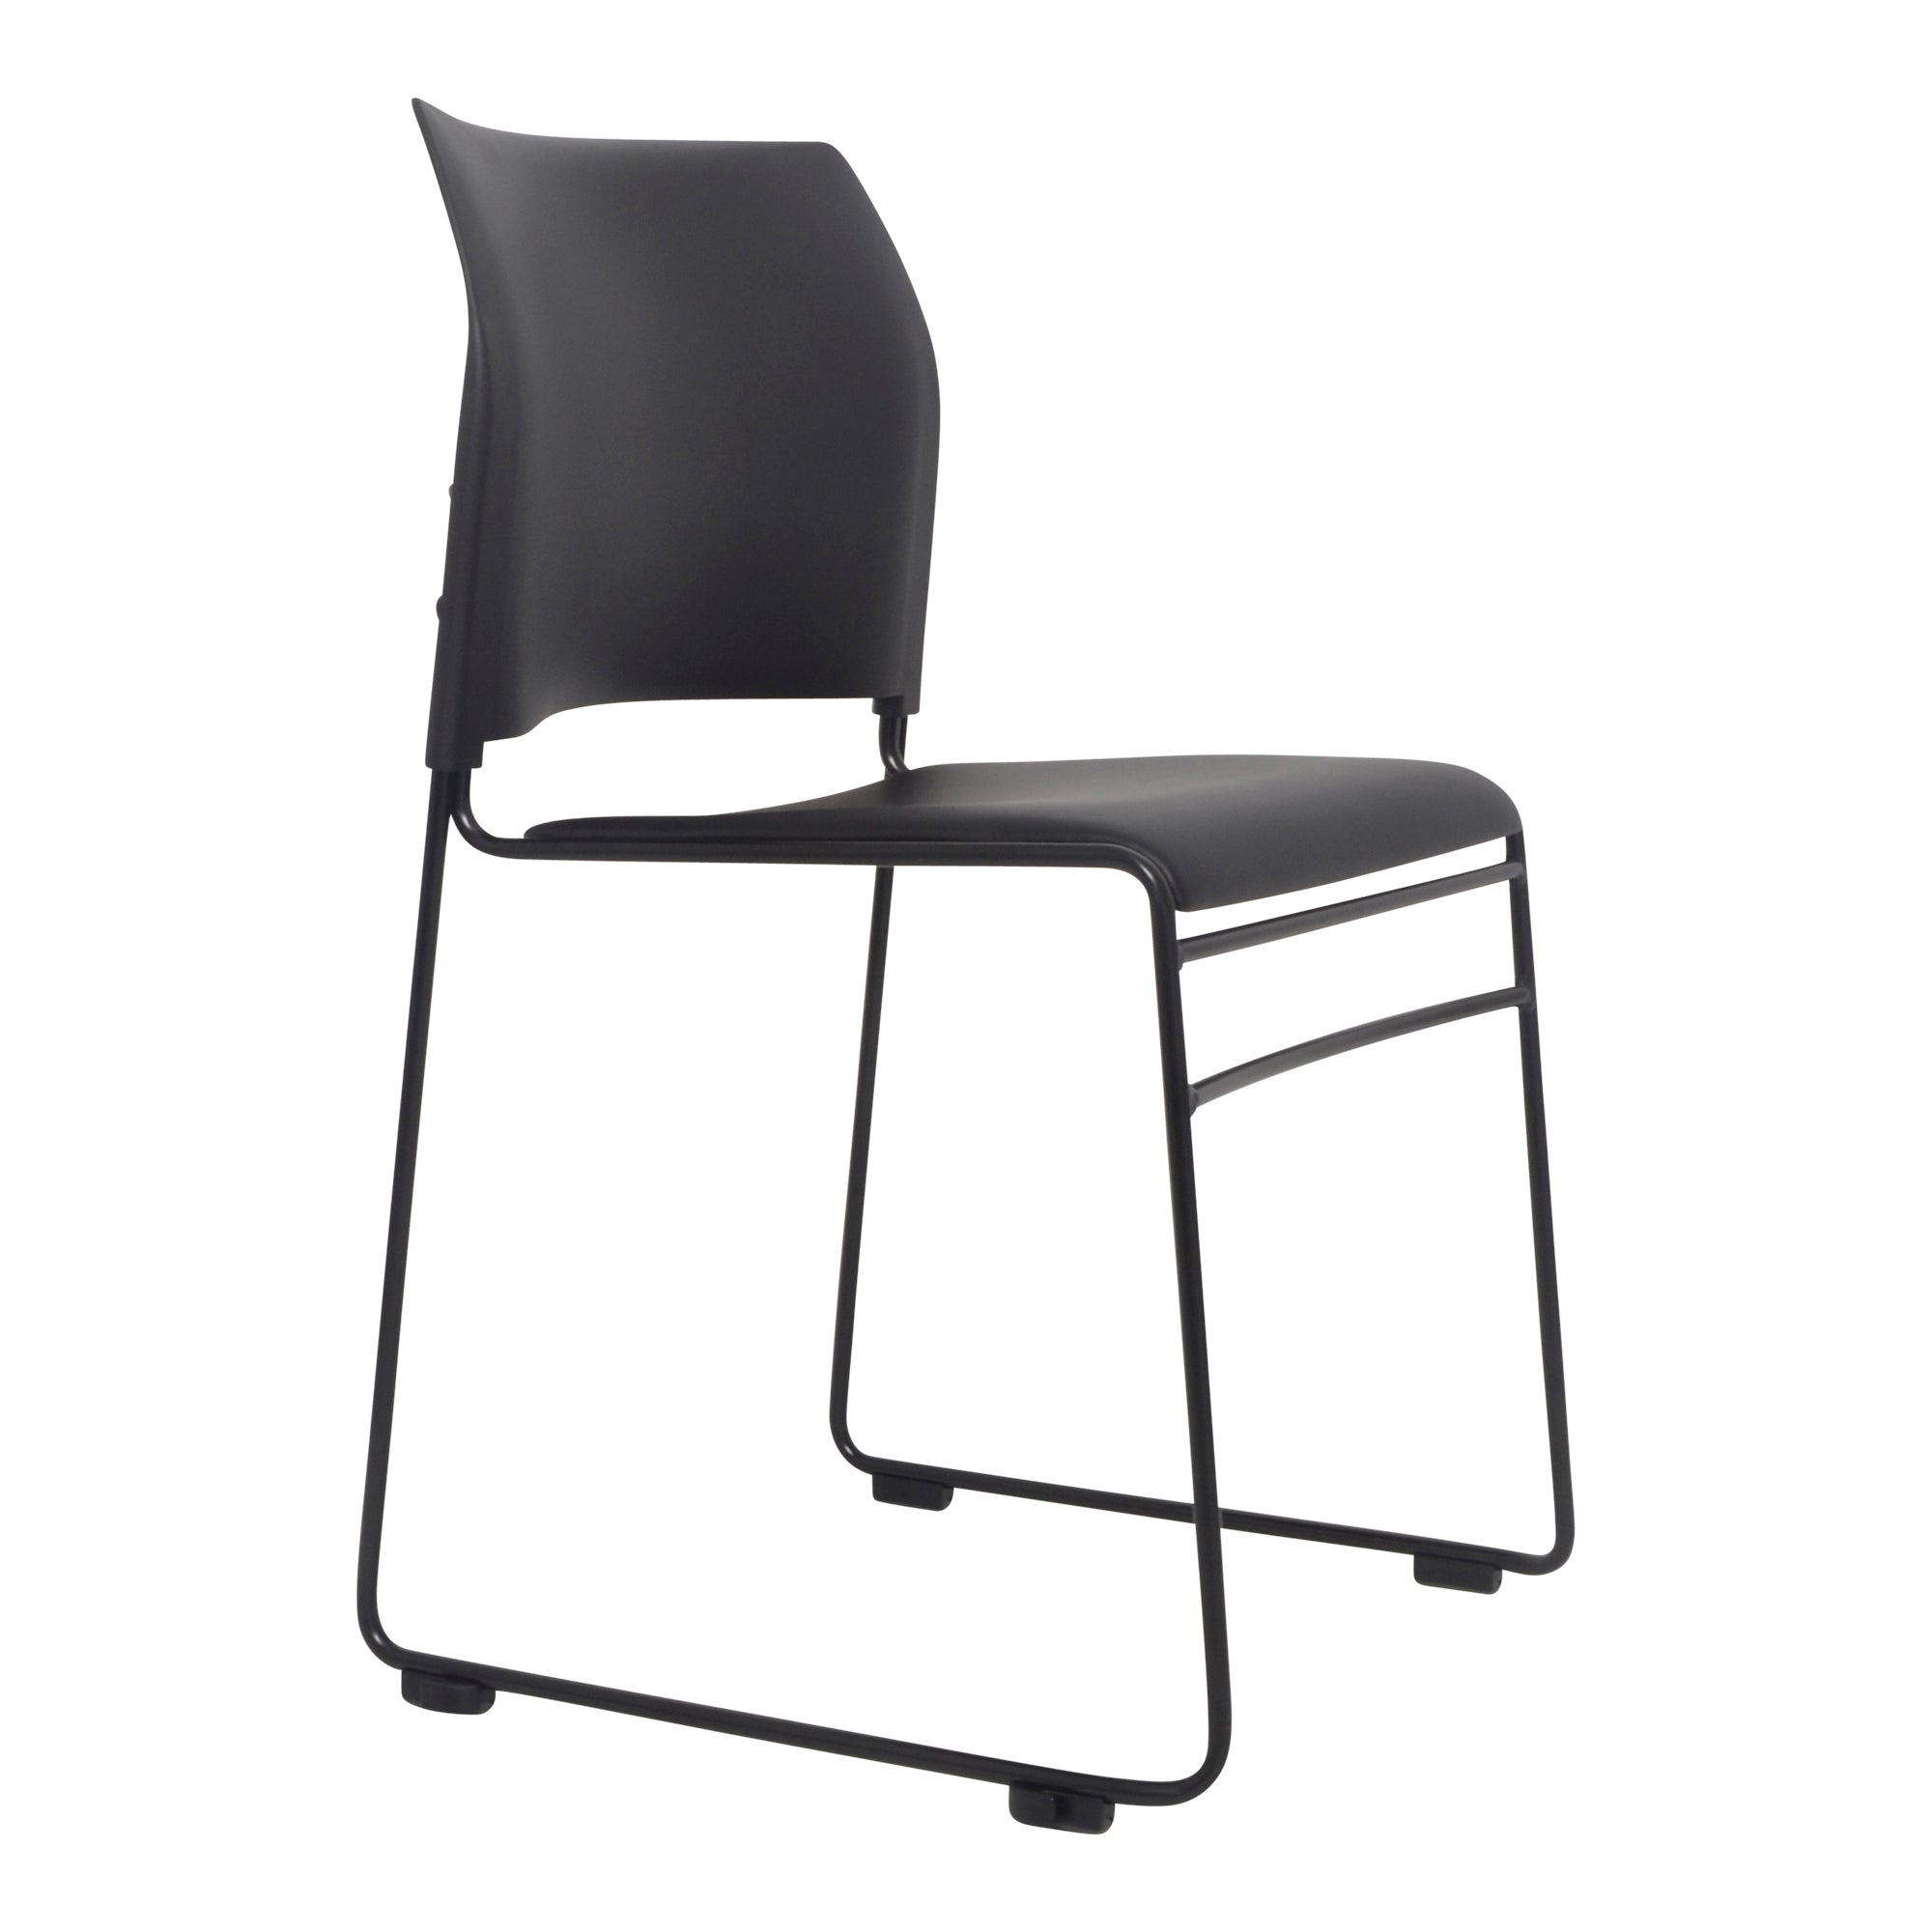 Maxim Chair with black sled base and black seat and back